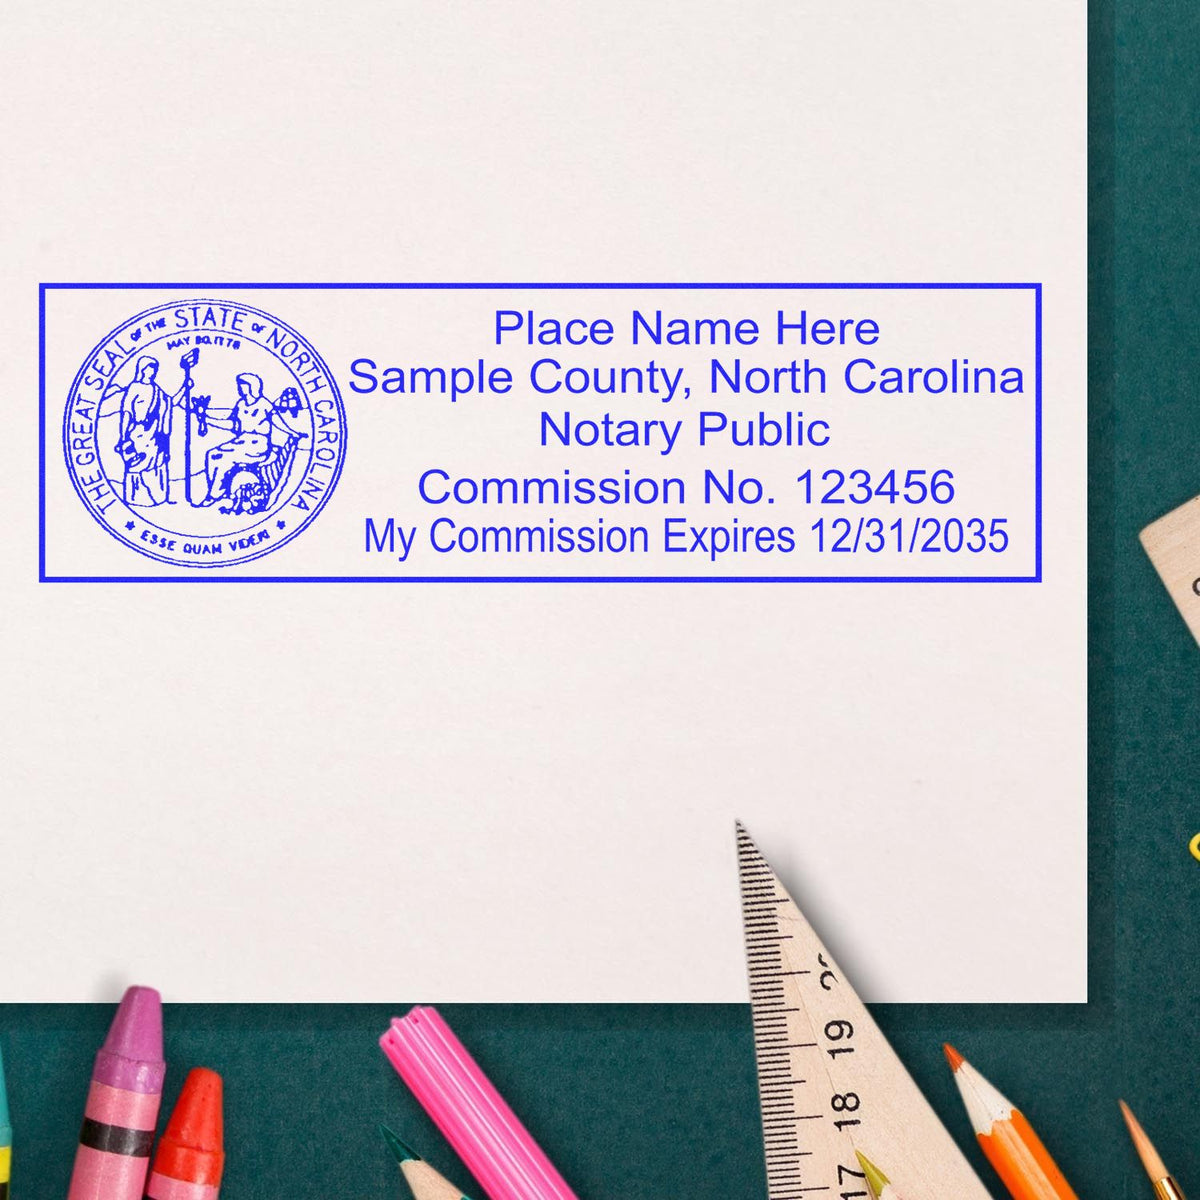 This paper is stamped with a sample imprint of the Wooden Handle North Carolina State Seal Notary Public Stamp, signifying its quality and reliability.